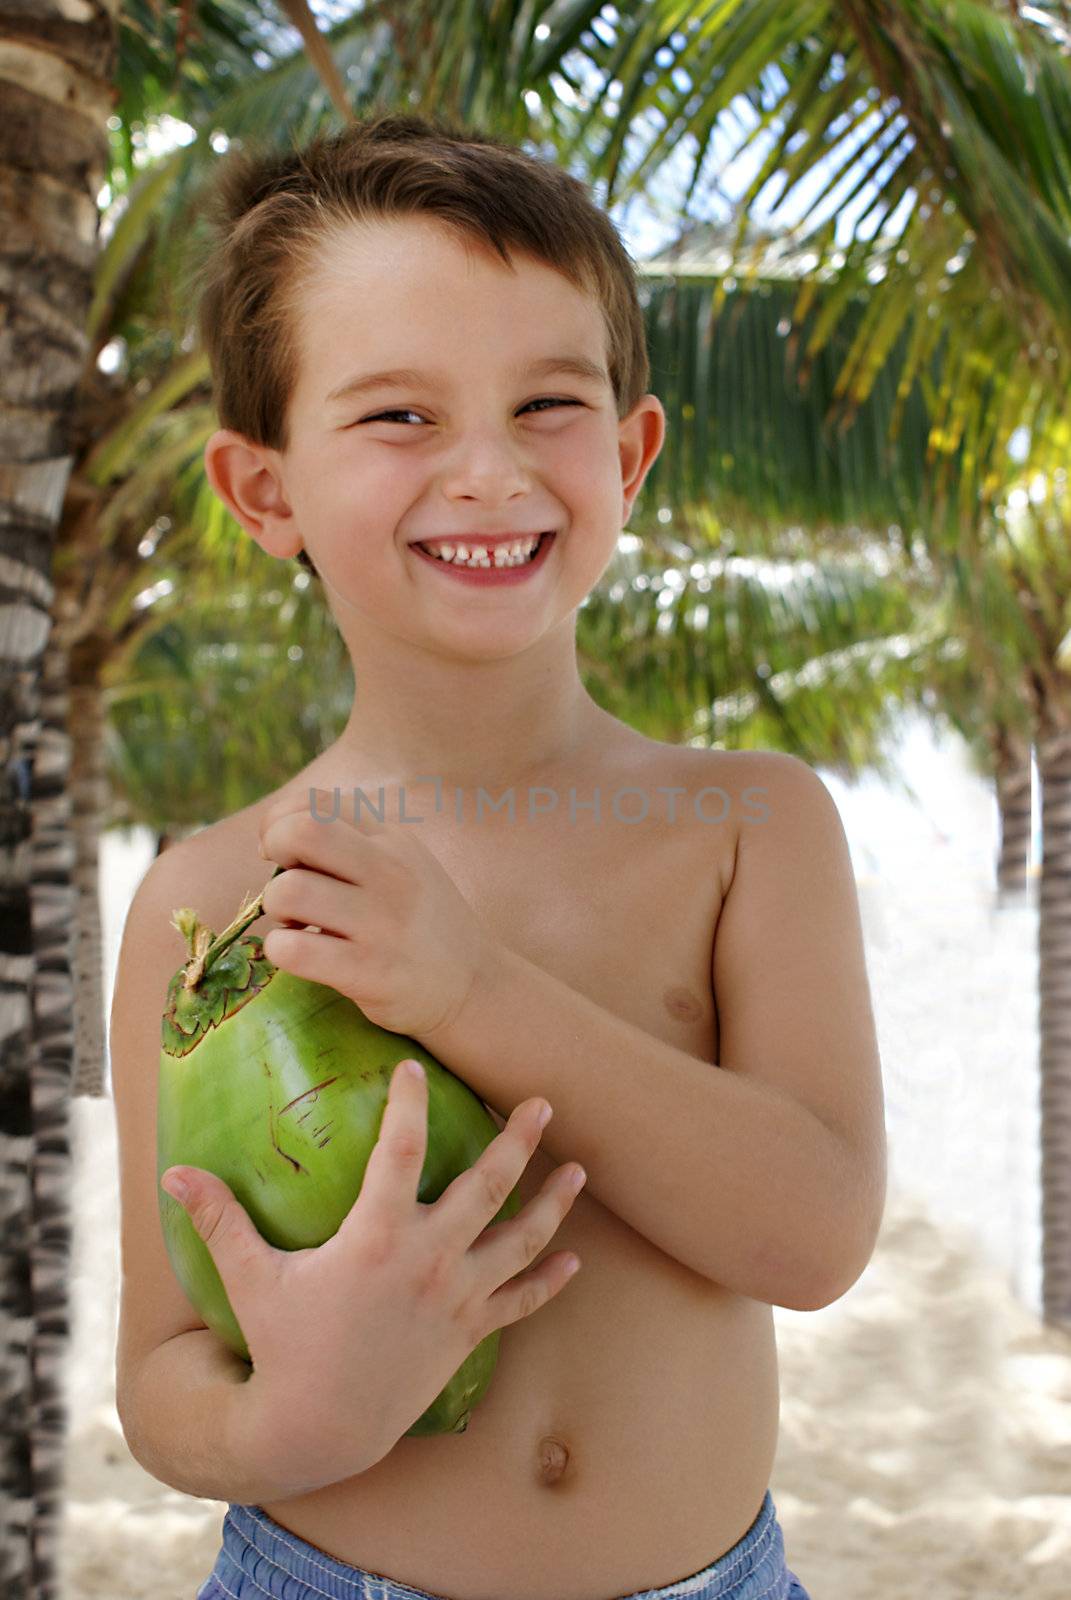 A five Years old holding a coconut, happy in a tropical place.